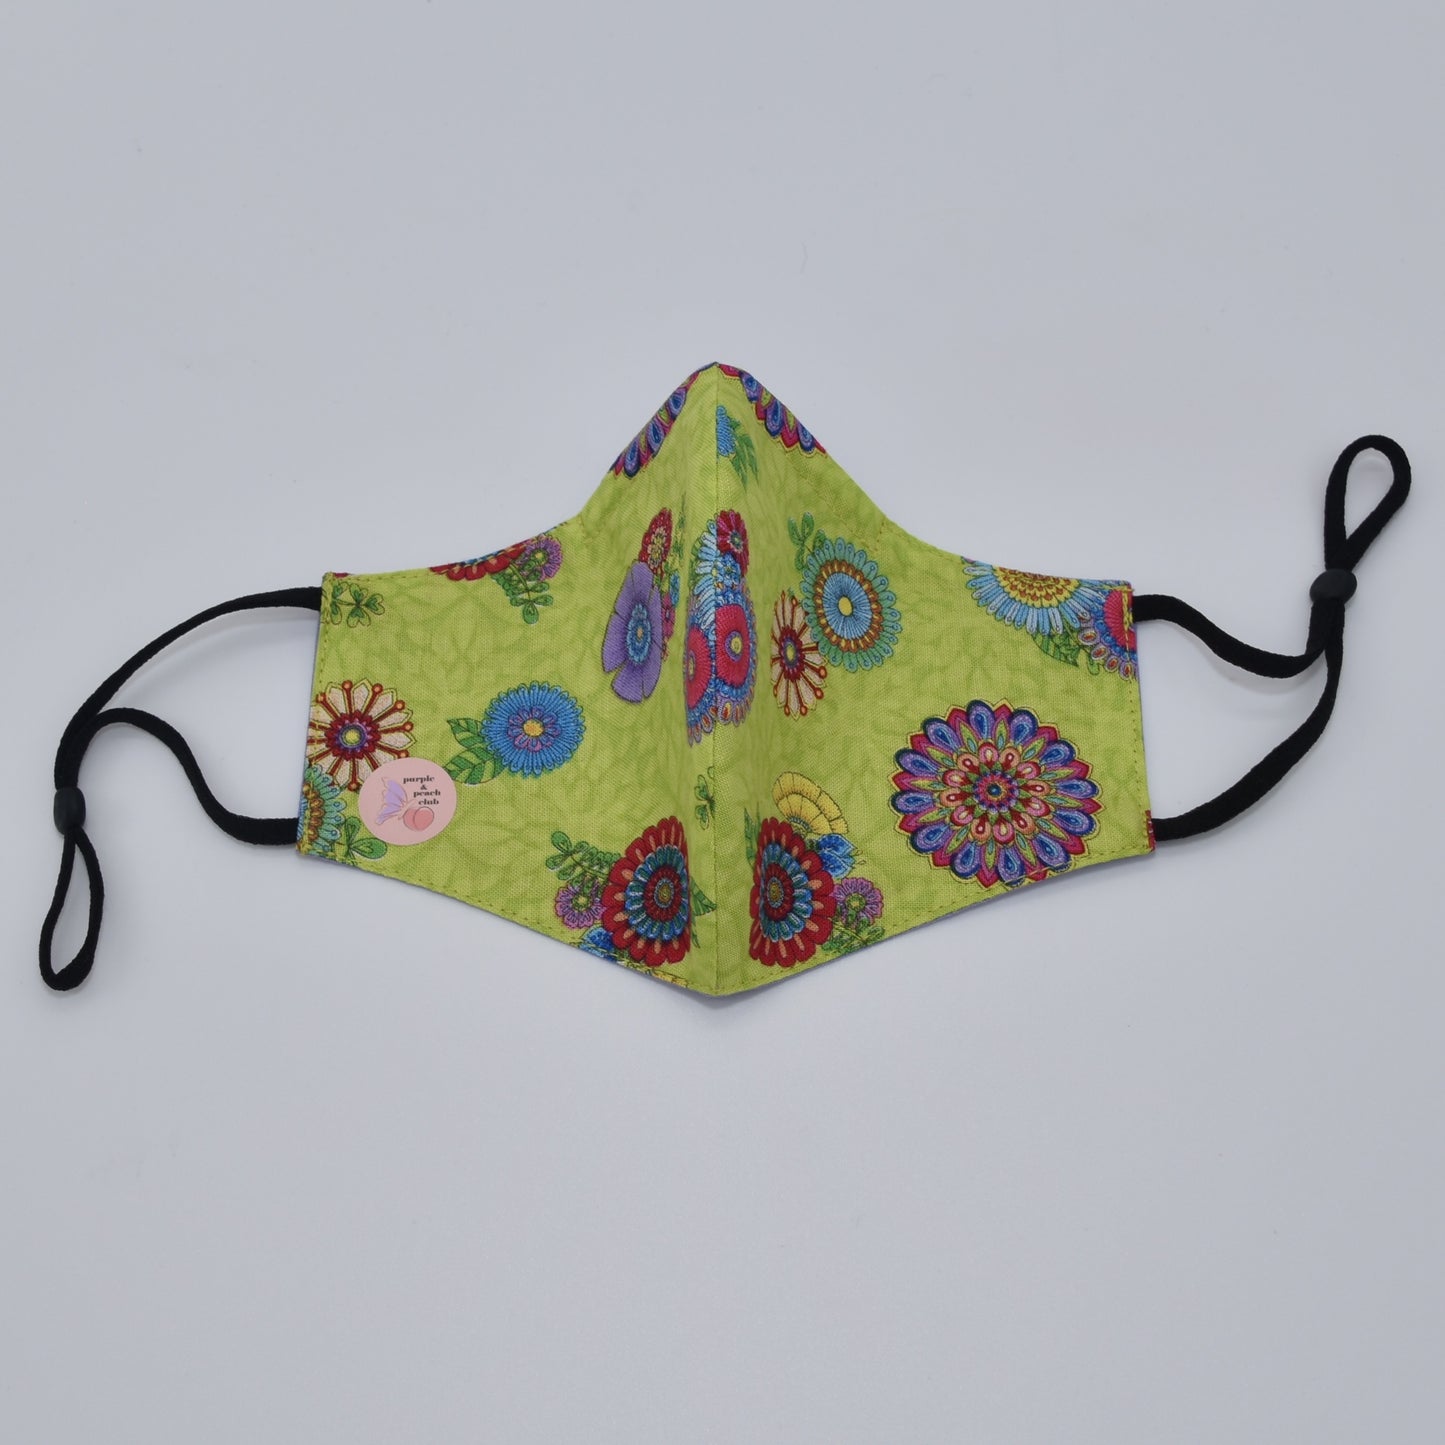 This lime green and multicolored floral print cotton face mask is reversible and double-layered, built for comfort with an adjustable nose bridge and adjustable ear straps. 